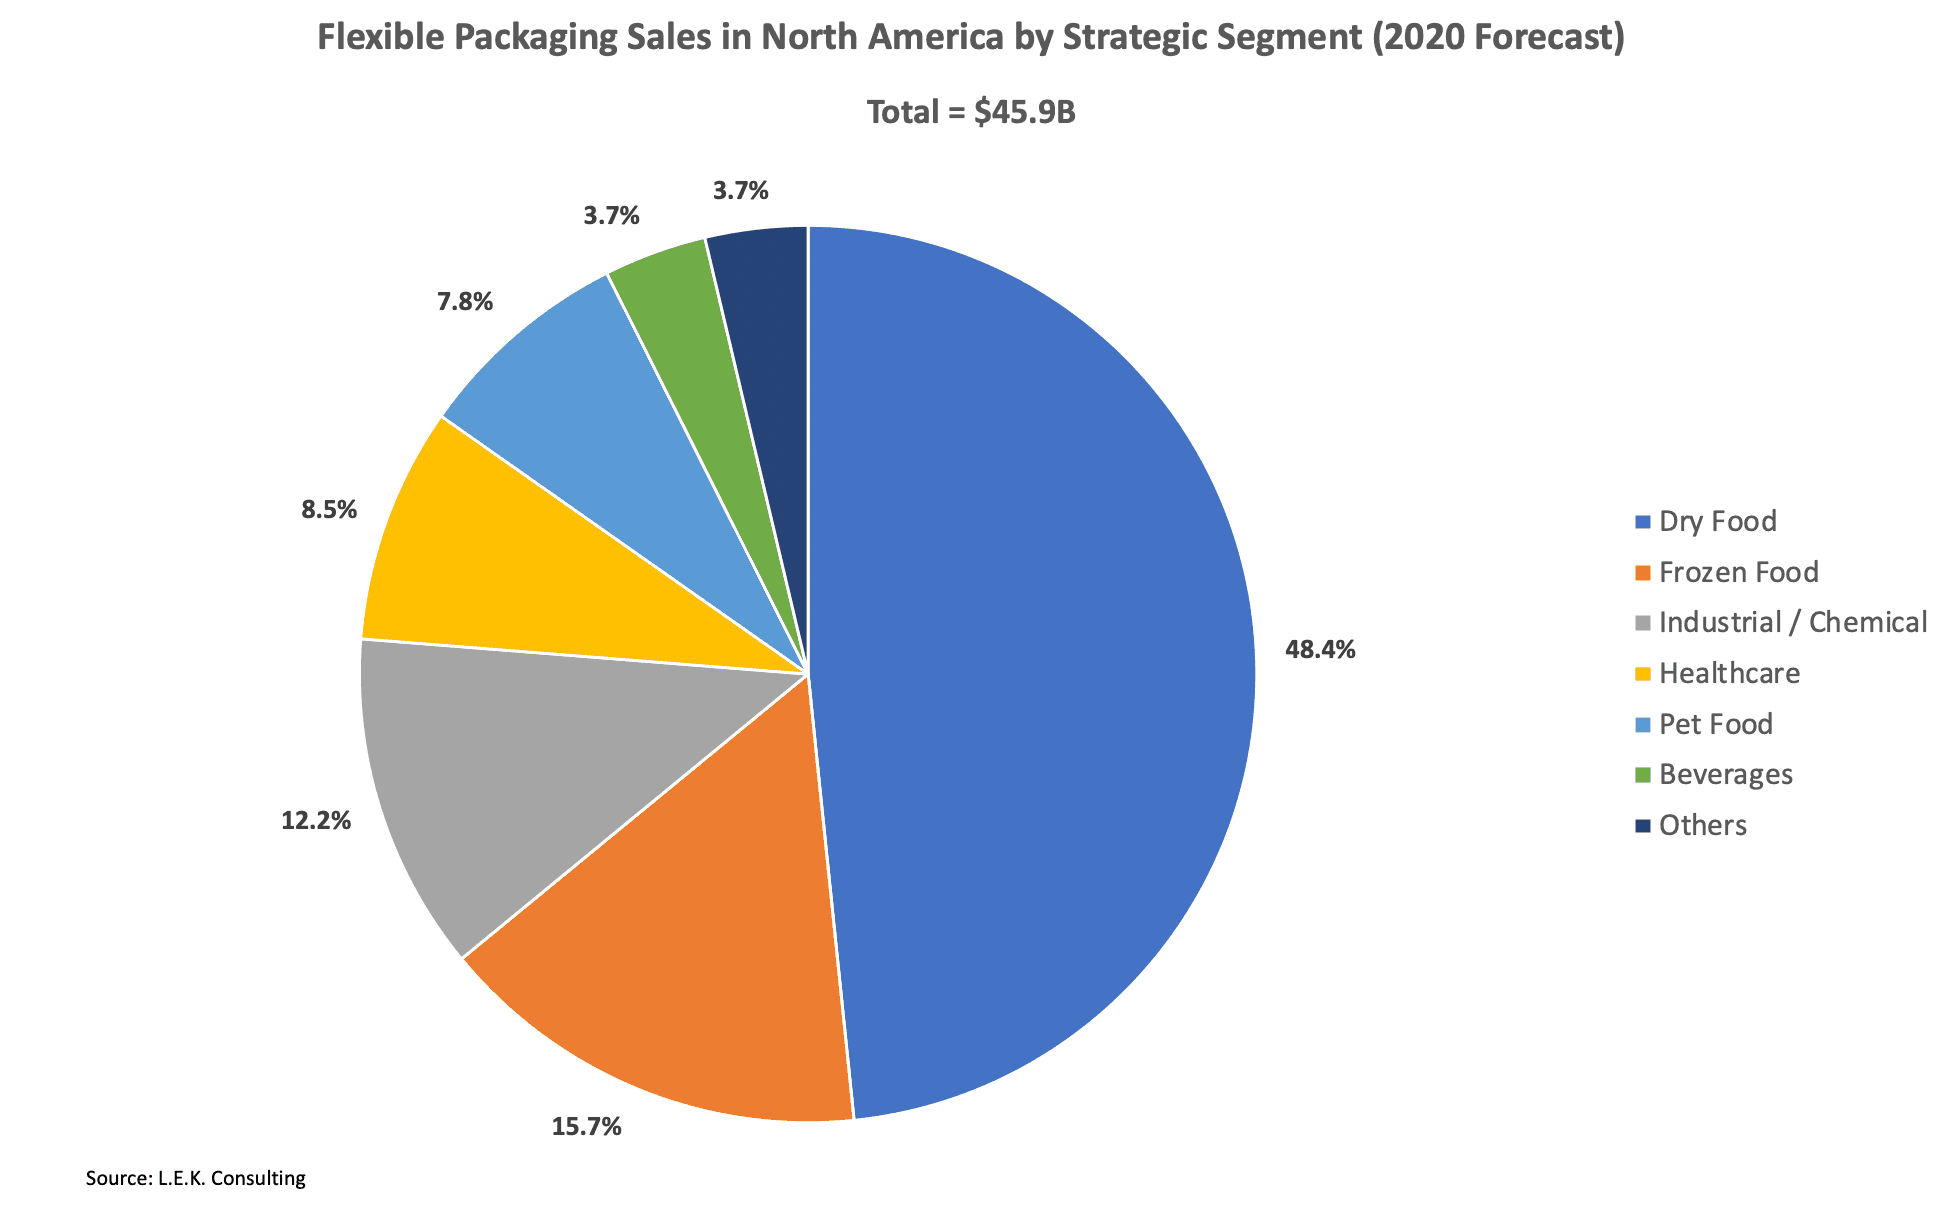 Flexible Packaging Sales Forecast